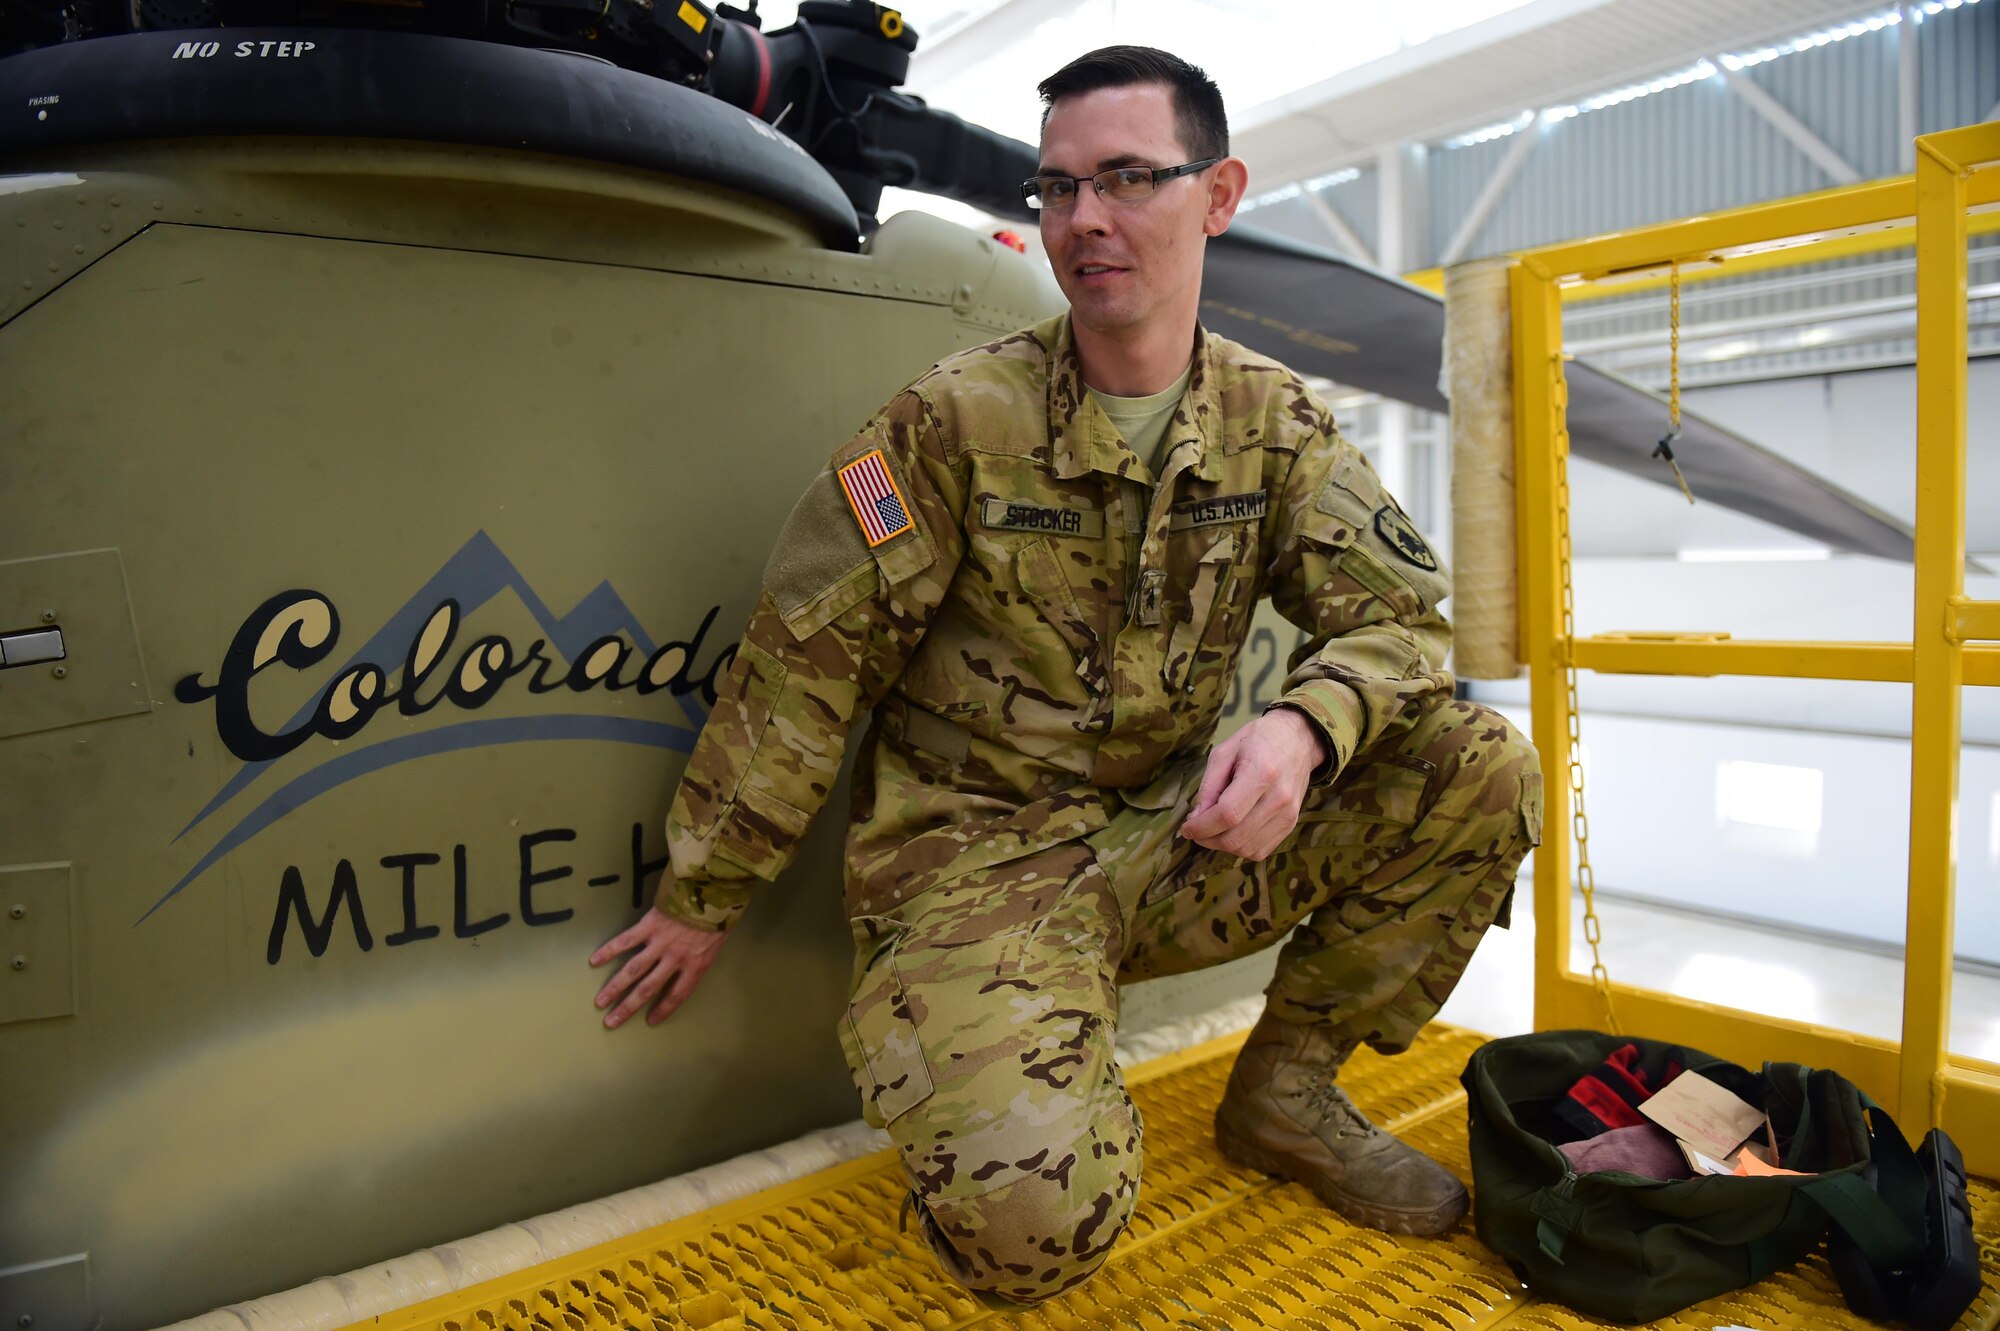 U.S. Army Sgt. Benjamin Stocker, Colorado National Guard CH-47 flight engineer and mechanic, sits next to his Ch-47 Chinook Feb. 19, 2016, at the Army Aviation Support Facility on Buckley Air Force Base.  As a Chinook mechanic Stocker maintained the aircraft, not only as a whole, but also the small details. (U.S. Air Force photo by Airman 1st Class Gabrielle Spradling/Released)